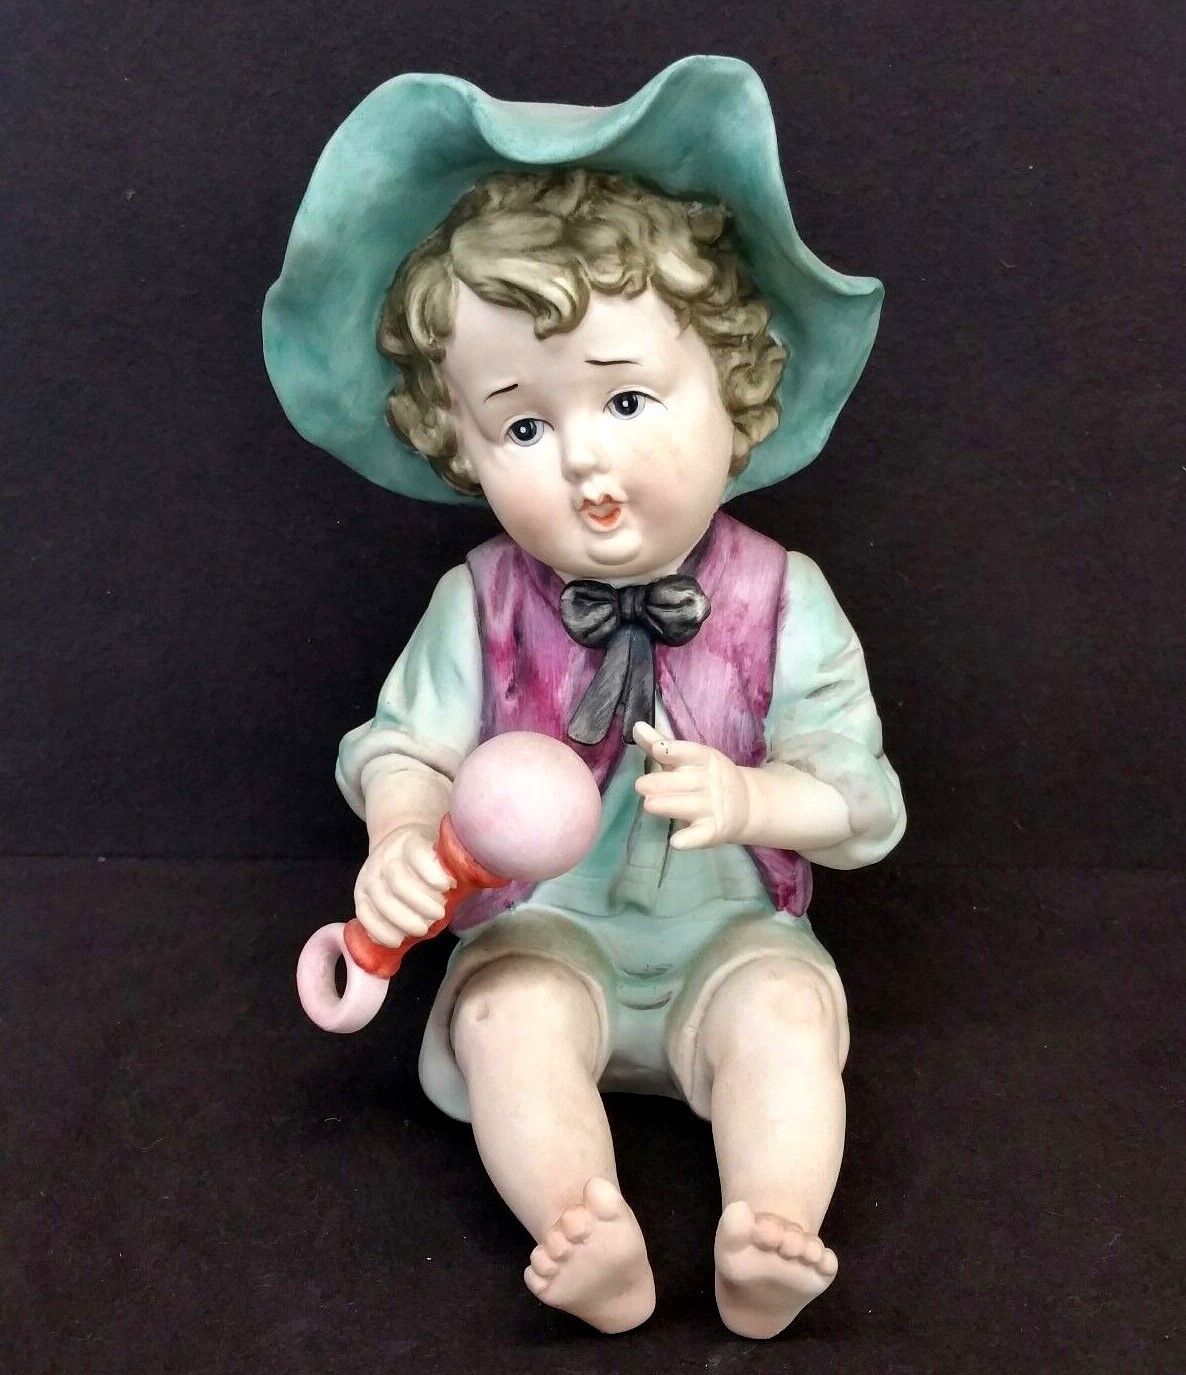 Antique Germany Bisque Porcelain Baby Toddler Figurine 9 5/8\'\' Height